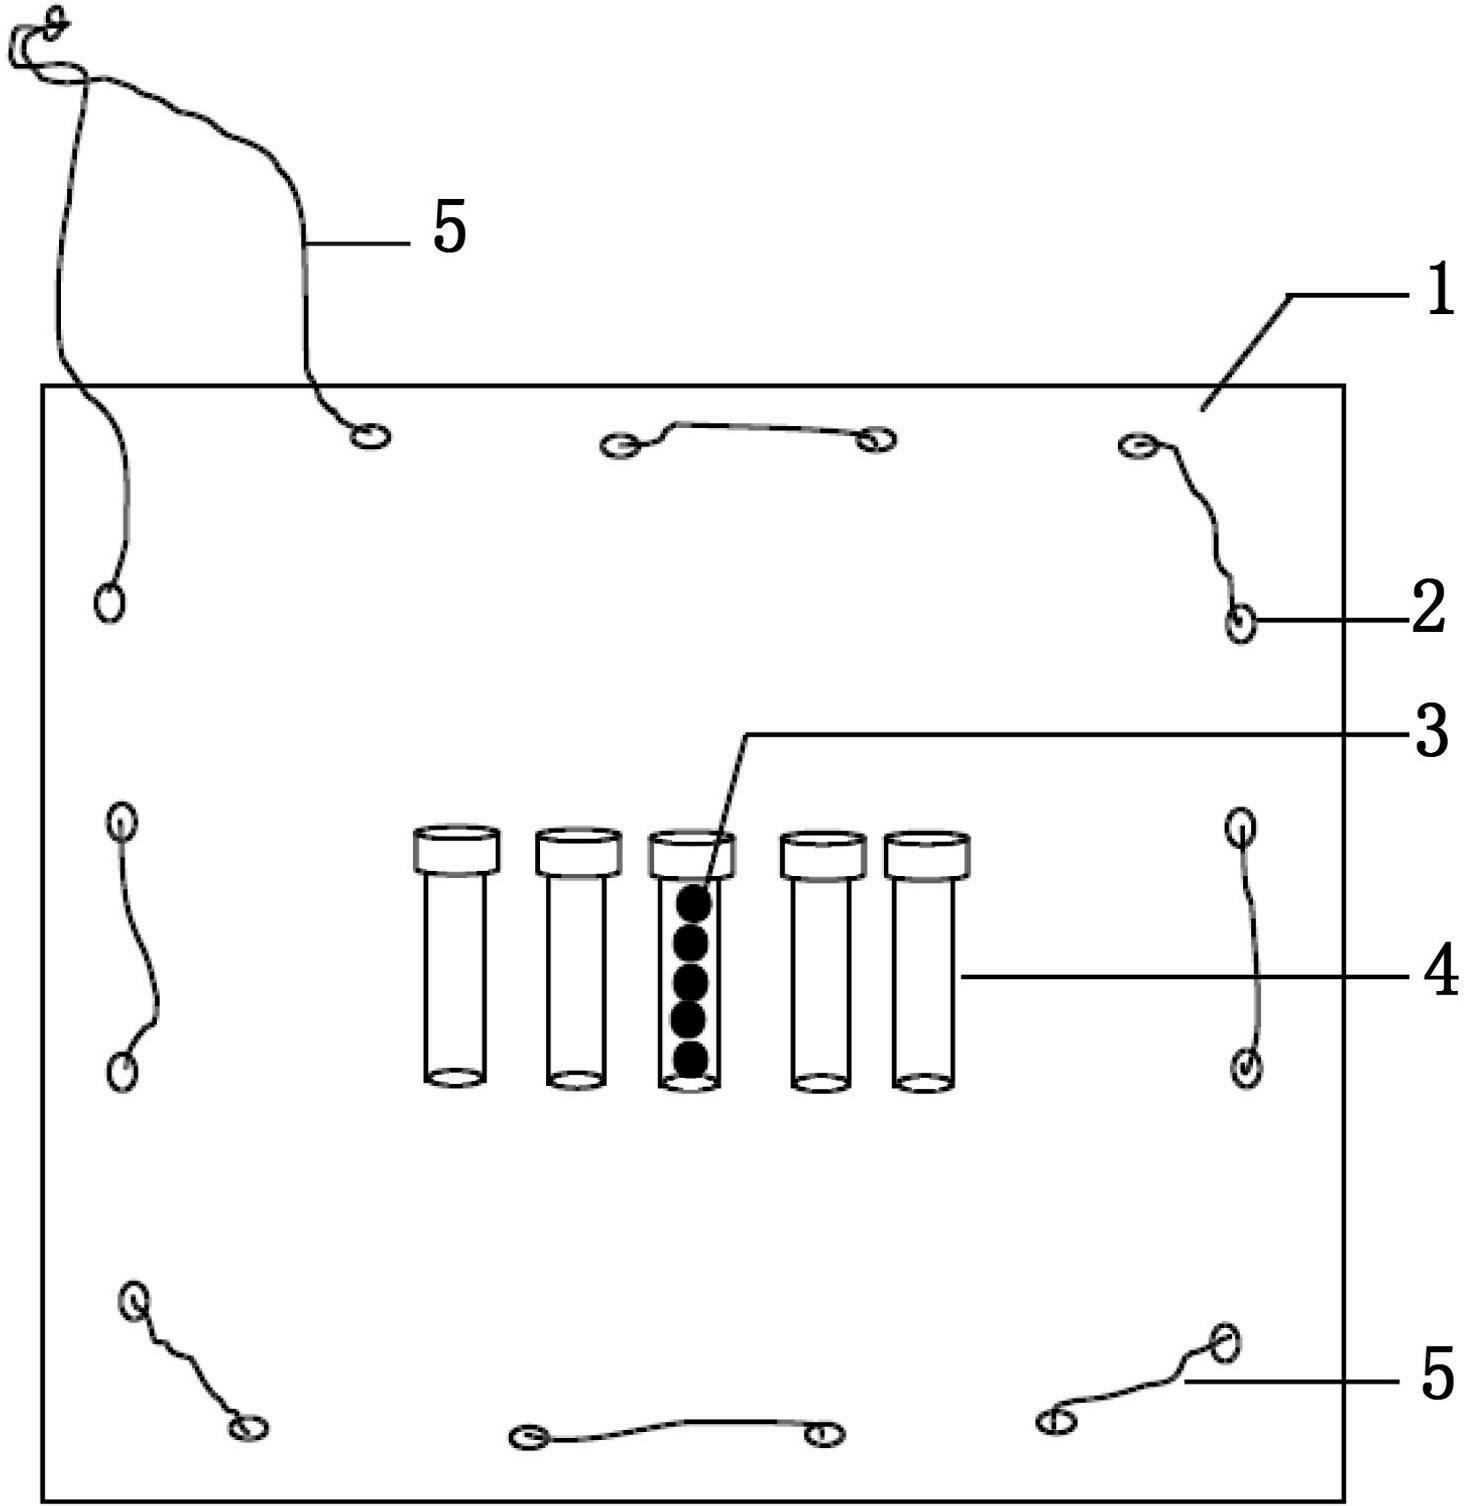 Device and method for quickly transferring frozen samples from program temperature lowering instrument to liquid nitrogen container